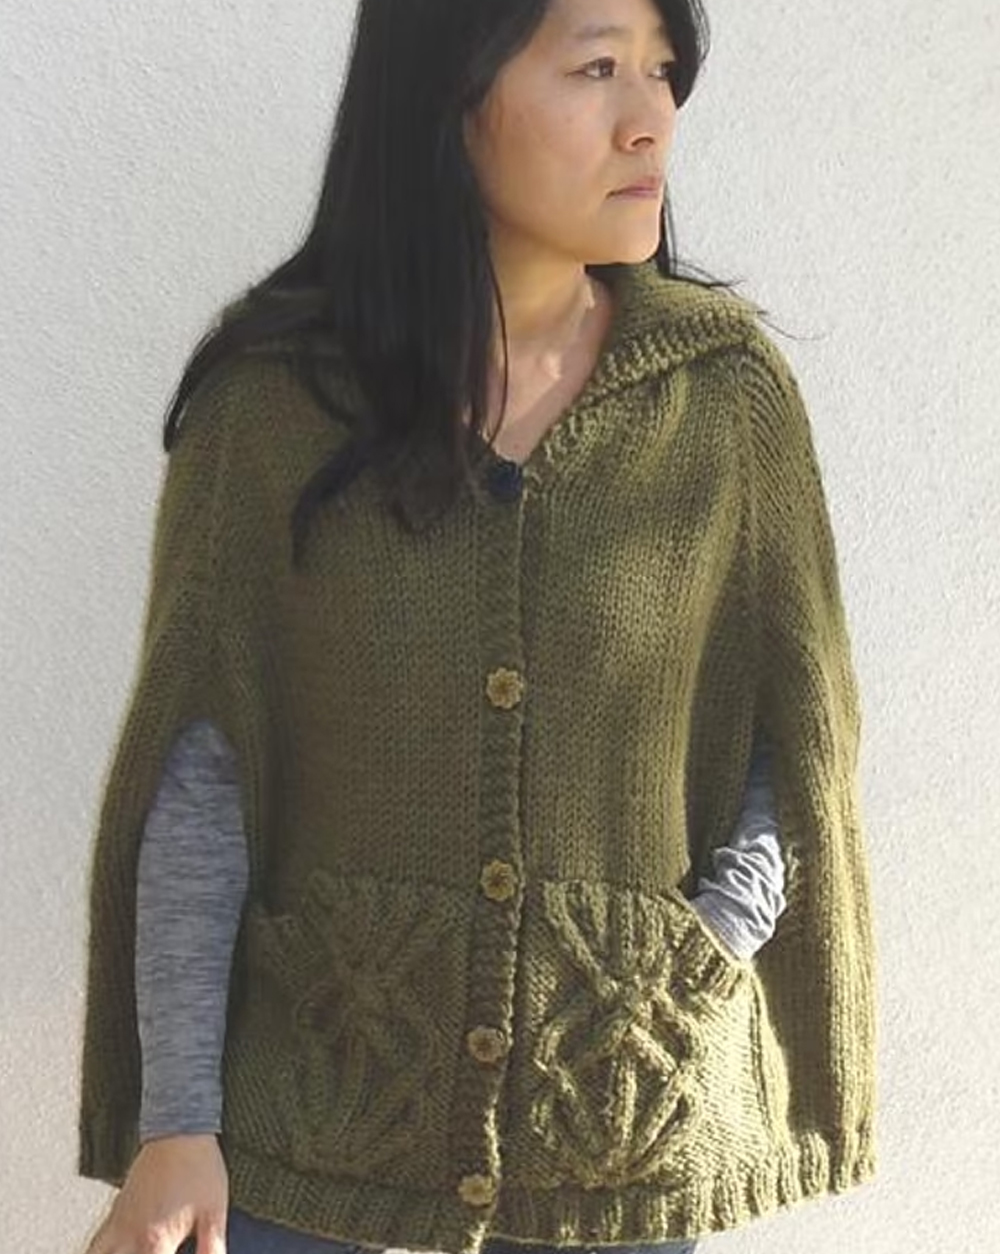 Covetable Cabled Cape Knitting Pattern